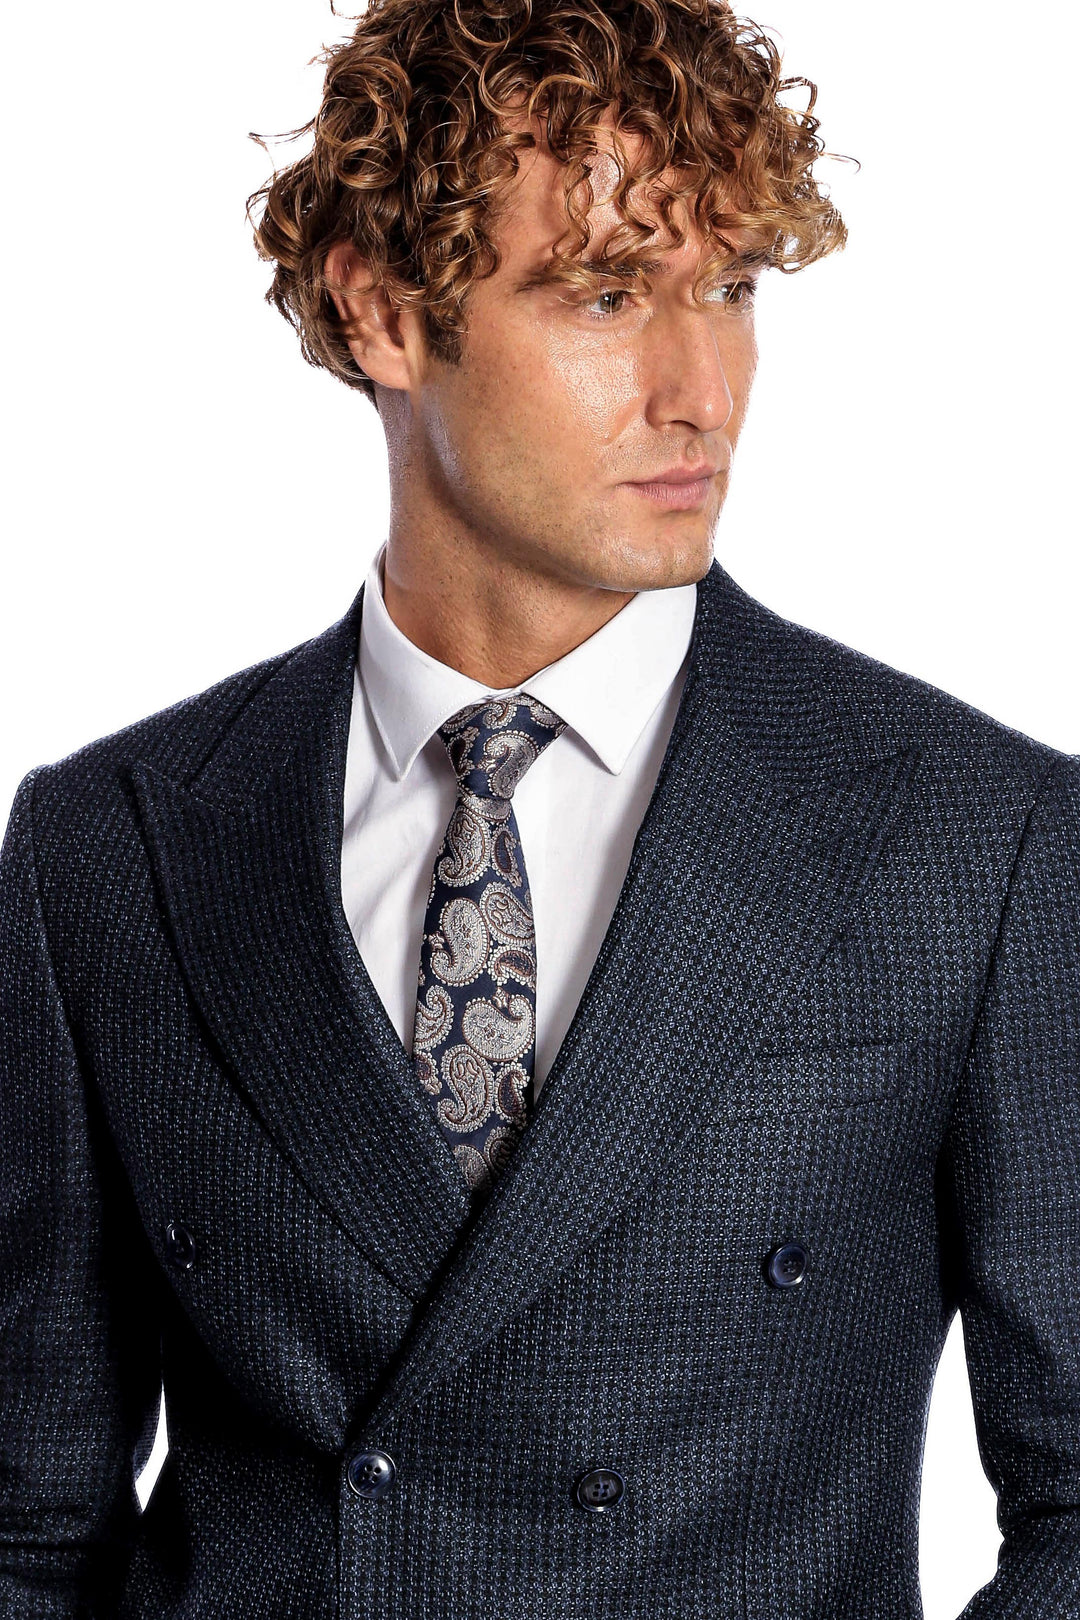 Houndstooth Patterned Navy Blue Men Double Breasted Blazer - Wessi